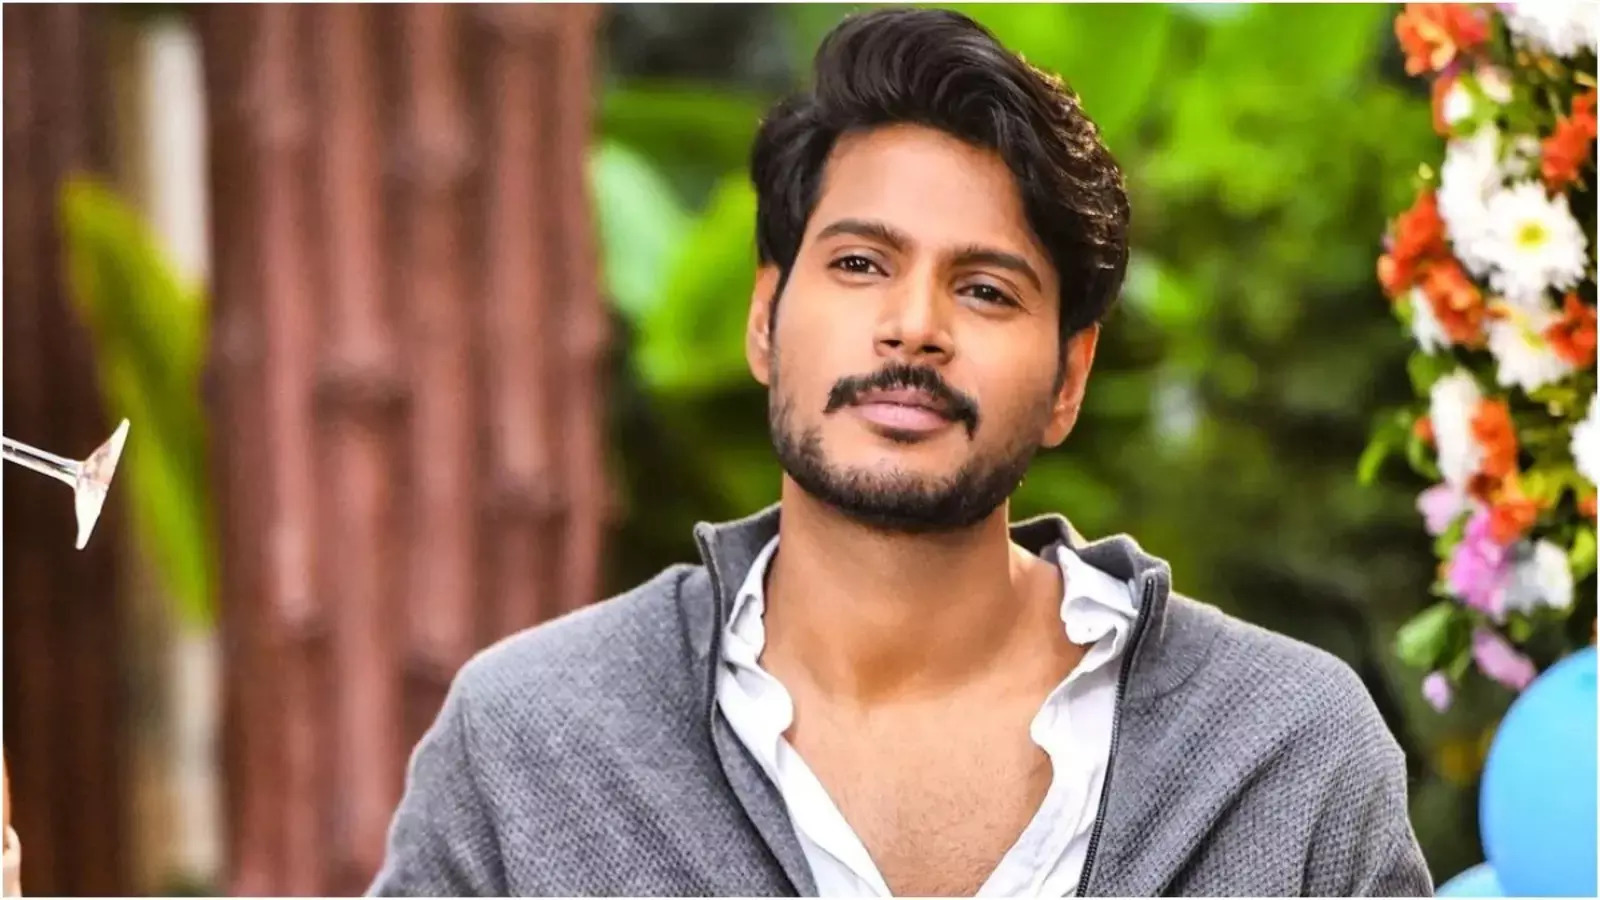 Sundeep Kishan Clarifies On The Food Safety Rules Of His Restaurant Says He Never Takes Love For Granted